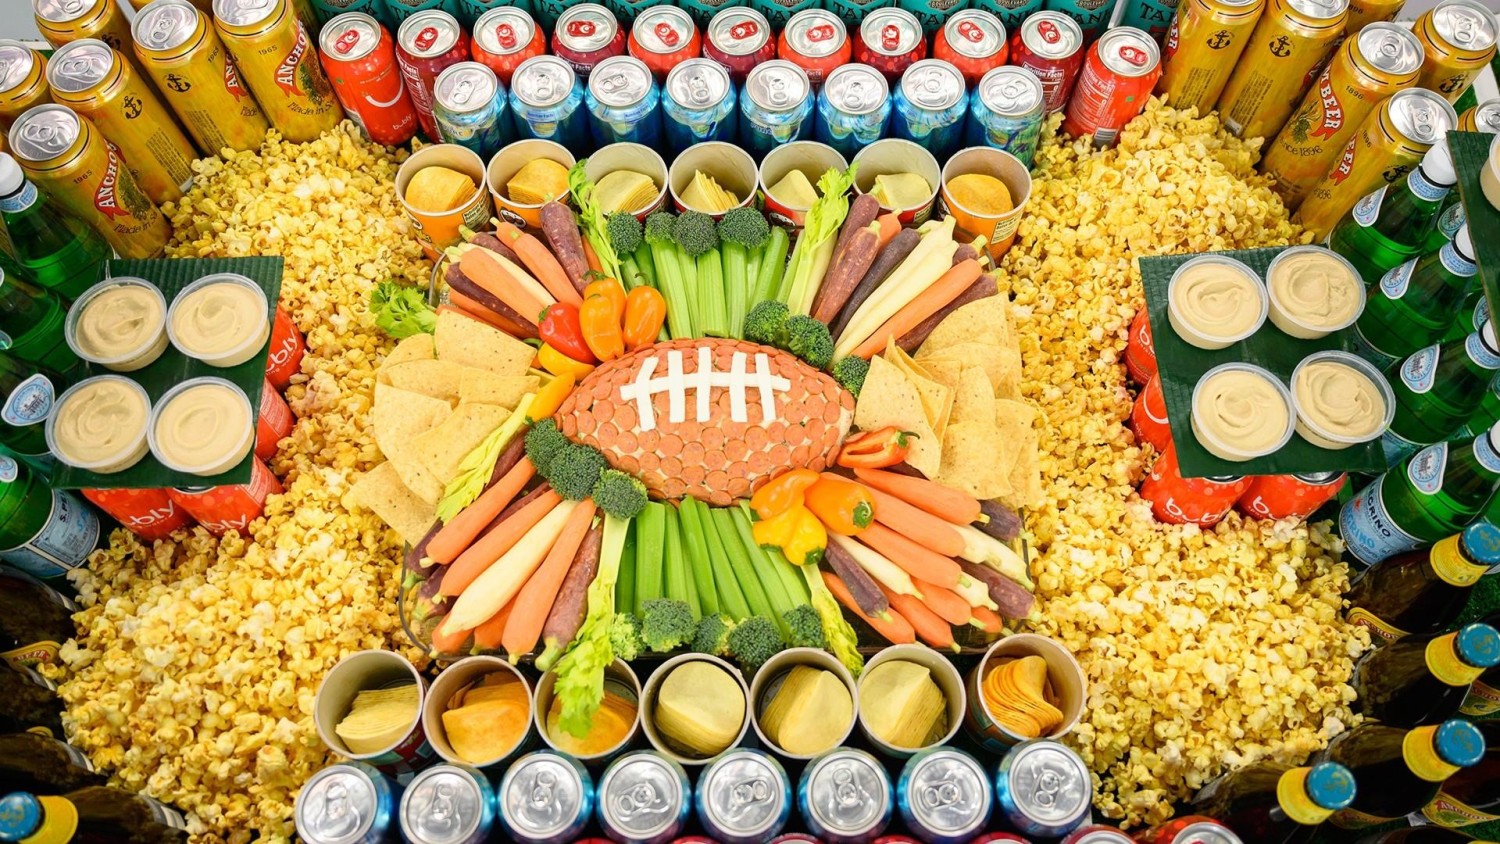 2020 Super Bowl food: Ranking the best party snacks